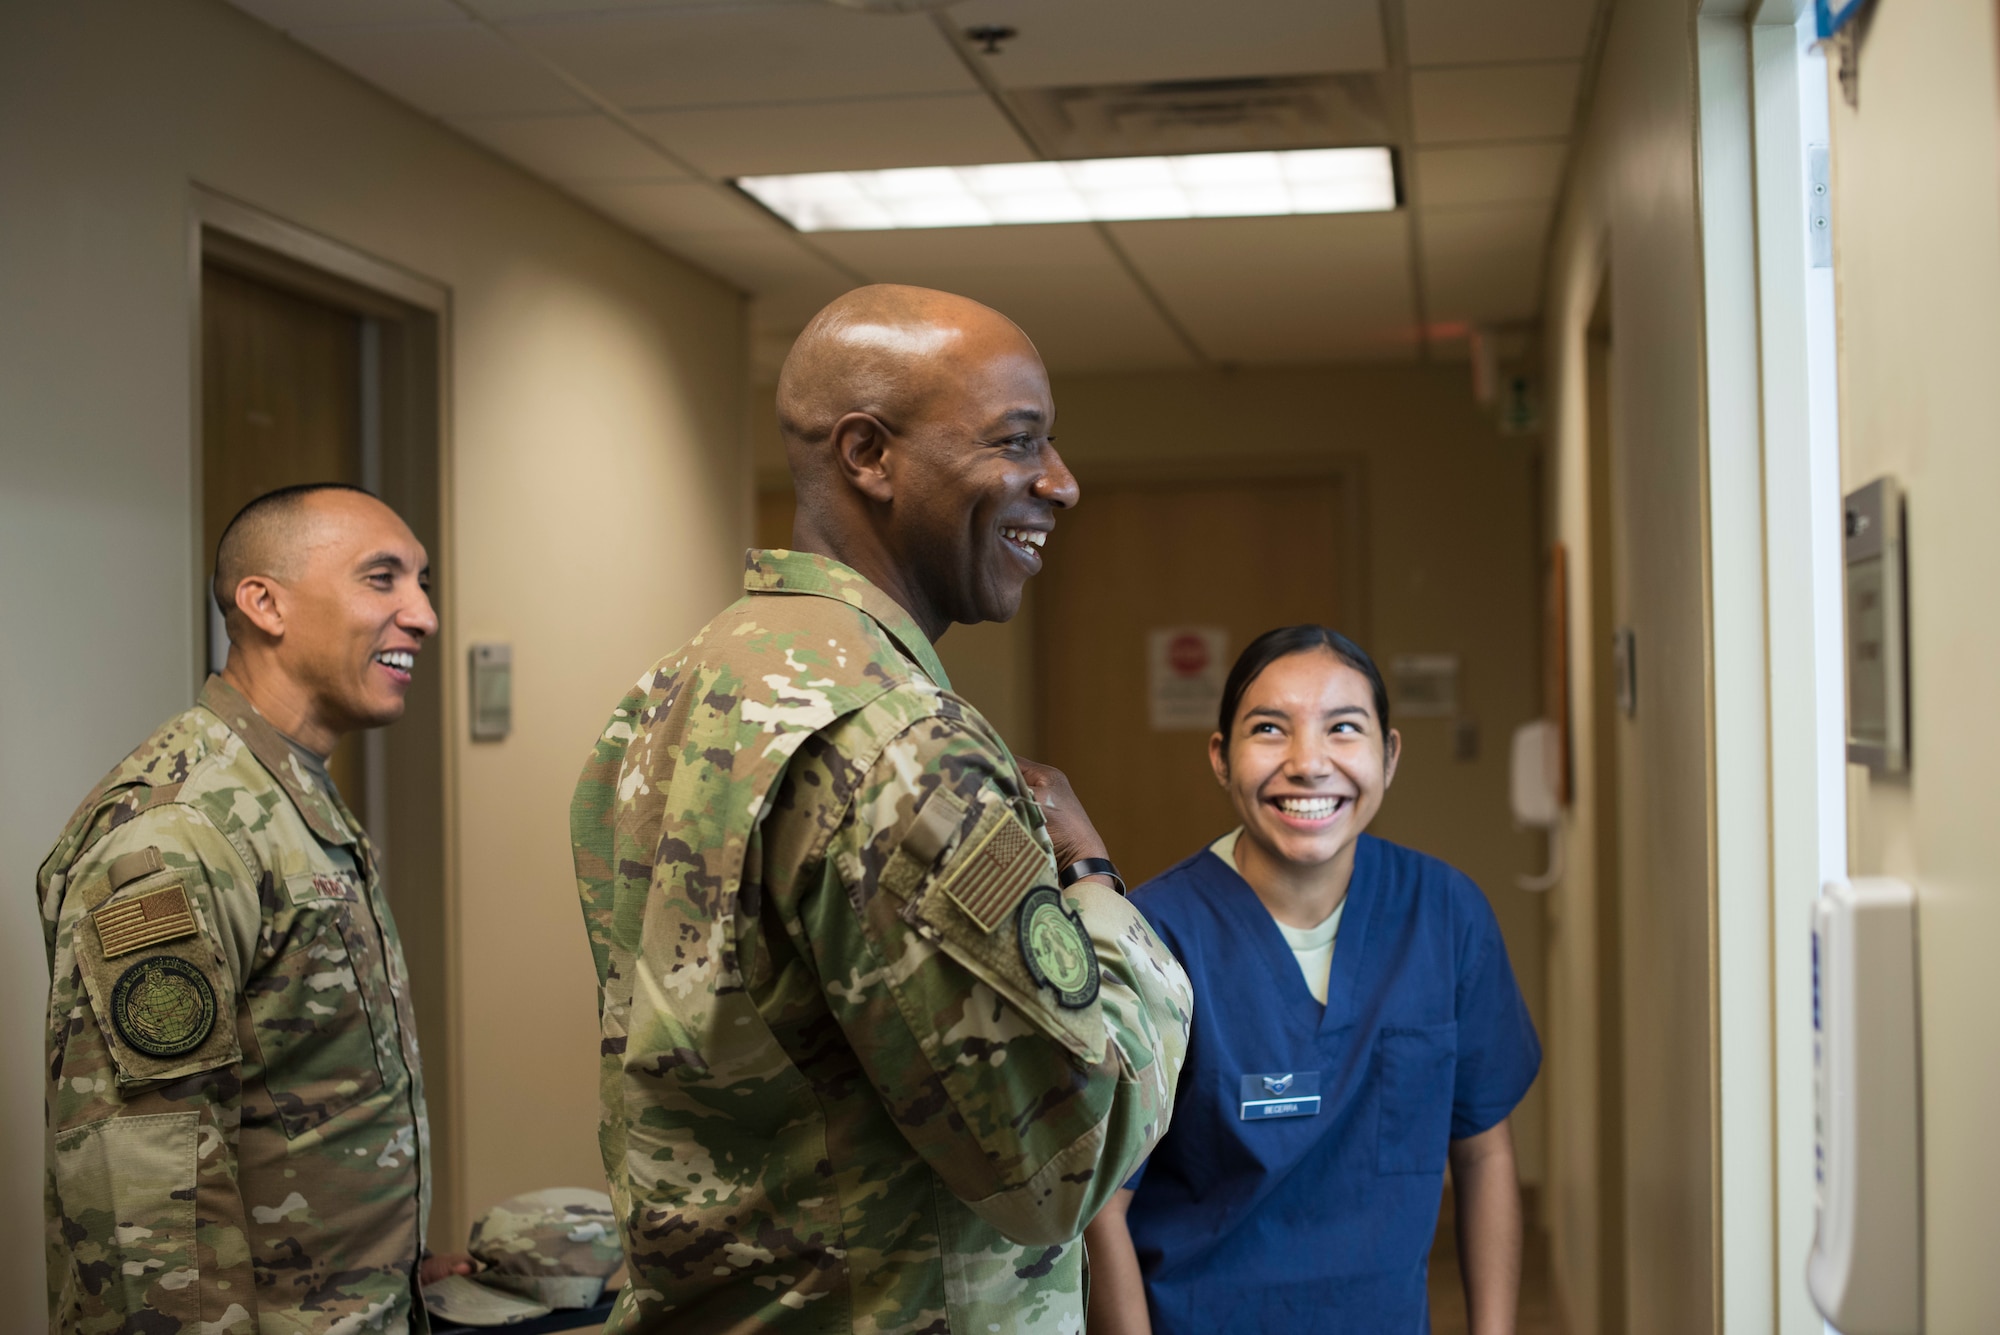 Chief Master Sergeant of the Air Force Kaleth O. Wright visits the 30th Medical Group Sept. 25, 2019 at Vandenberg Air Force Base, Calif. Wright toured different offices within the building, exploring what each section does to enable and support service members, their families and the 30th Space Wing mission. (U.S. Air Force photo by Airman 1st Class Aubree Milks)